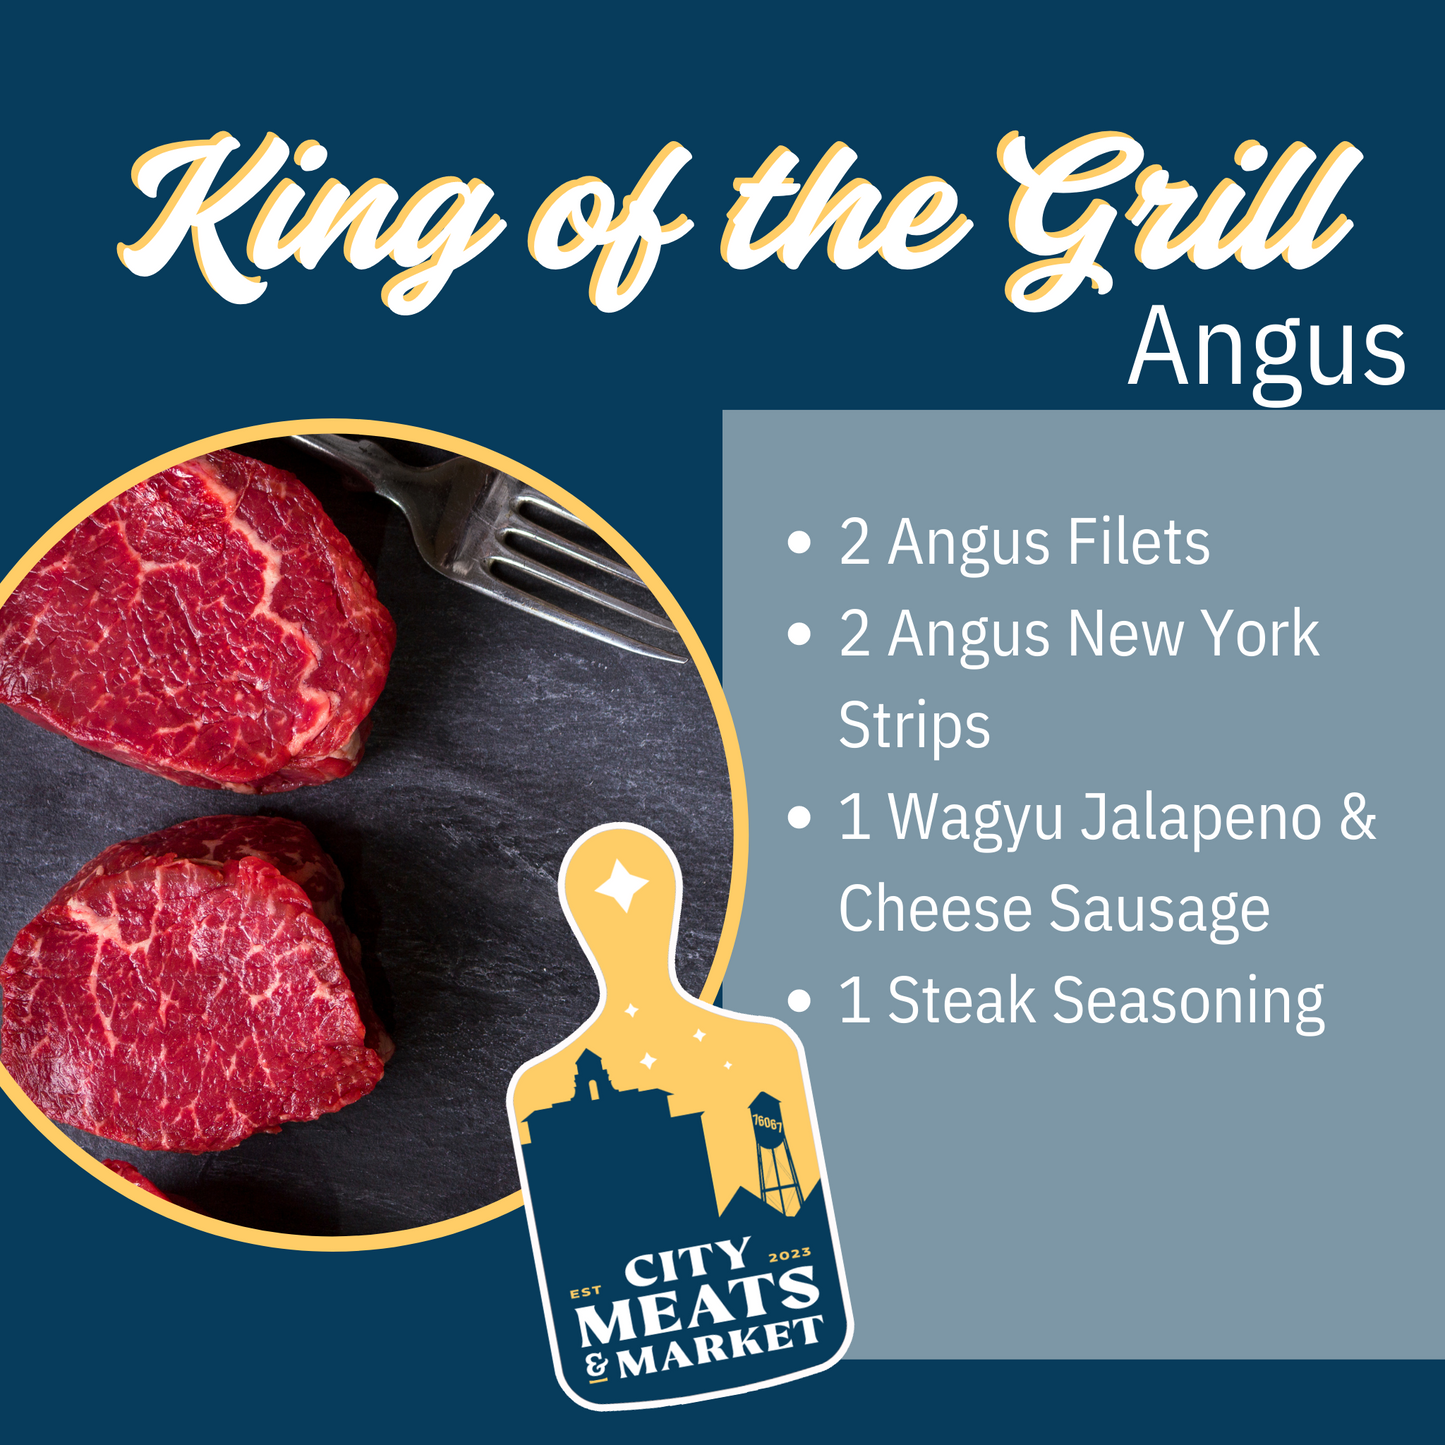 King of the Grill- ANGUS